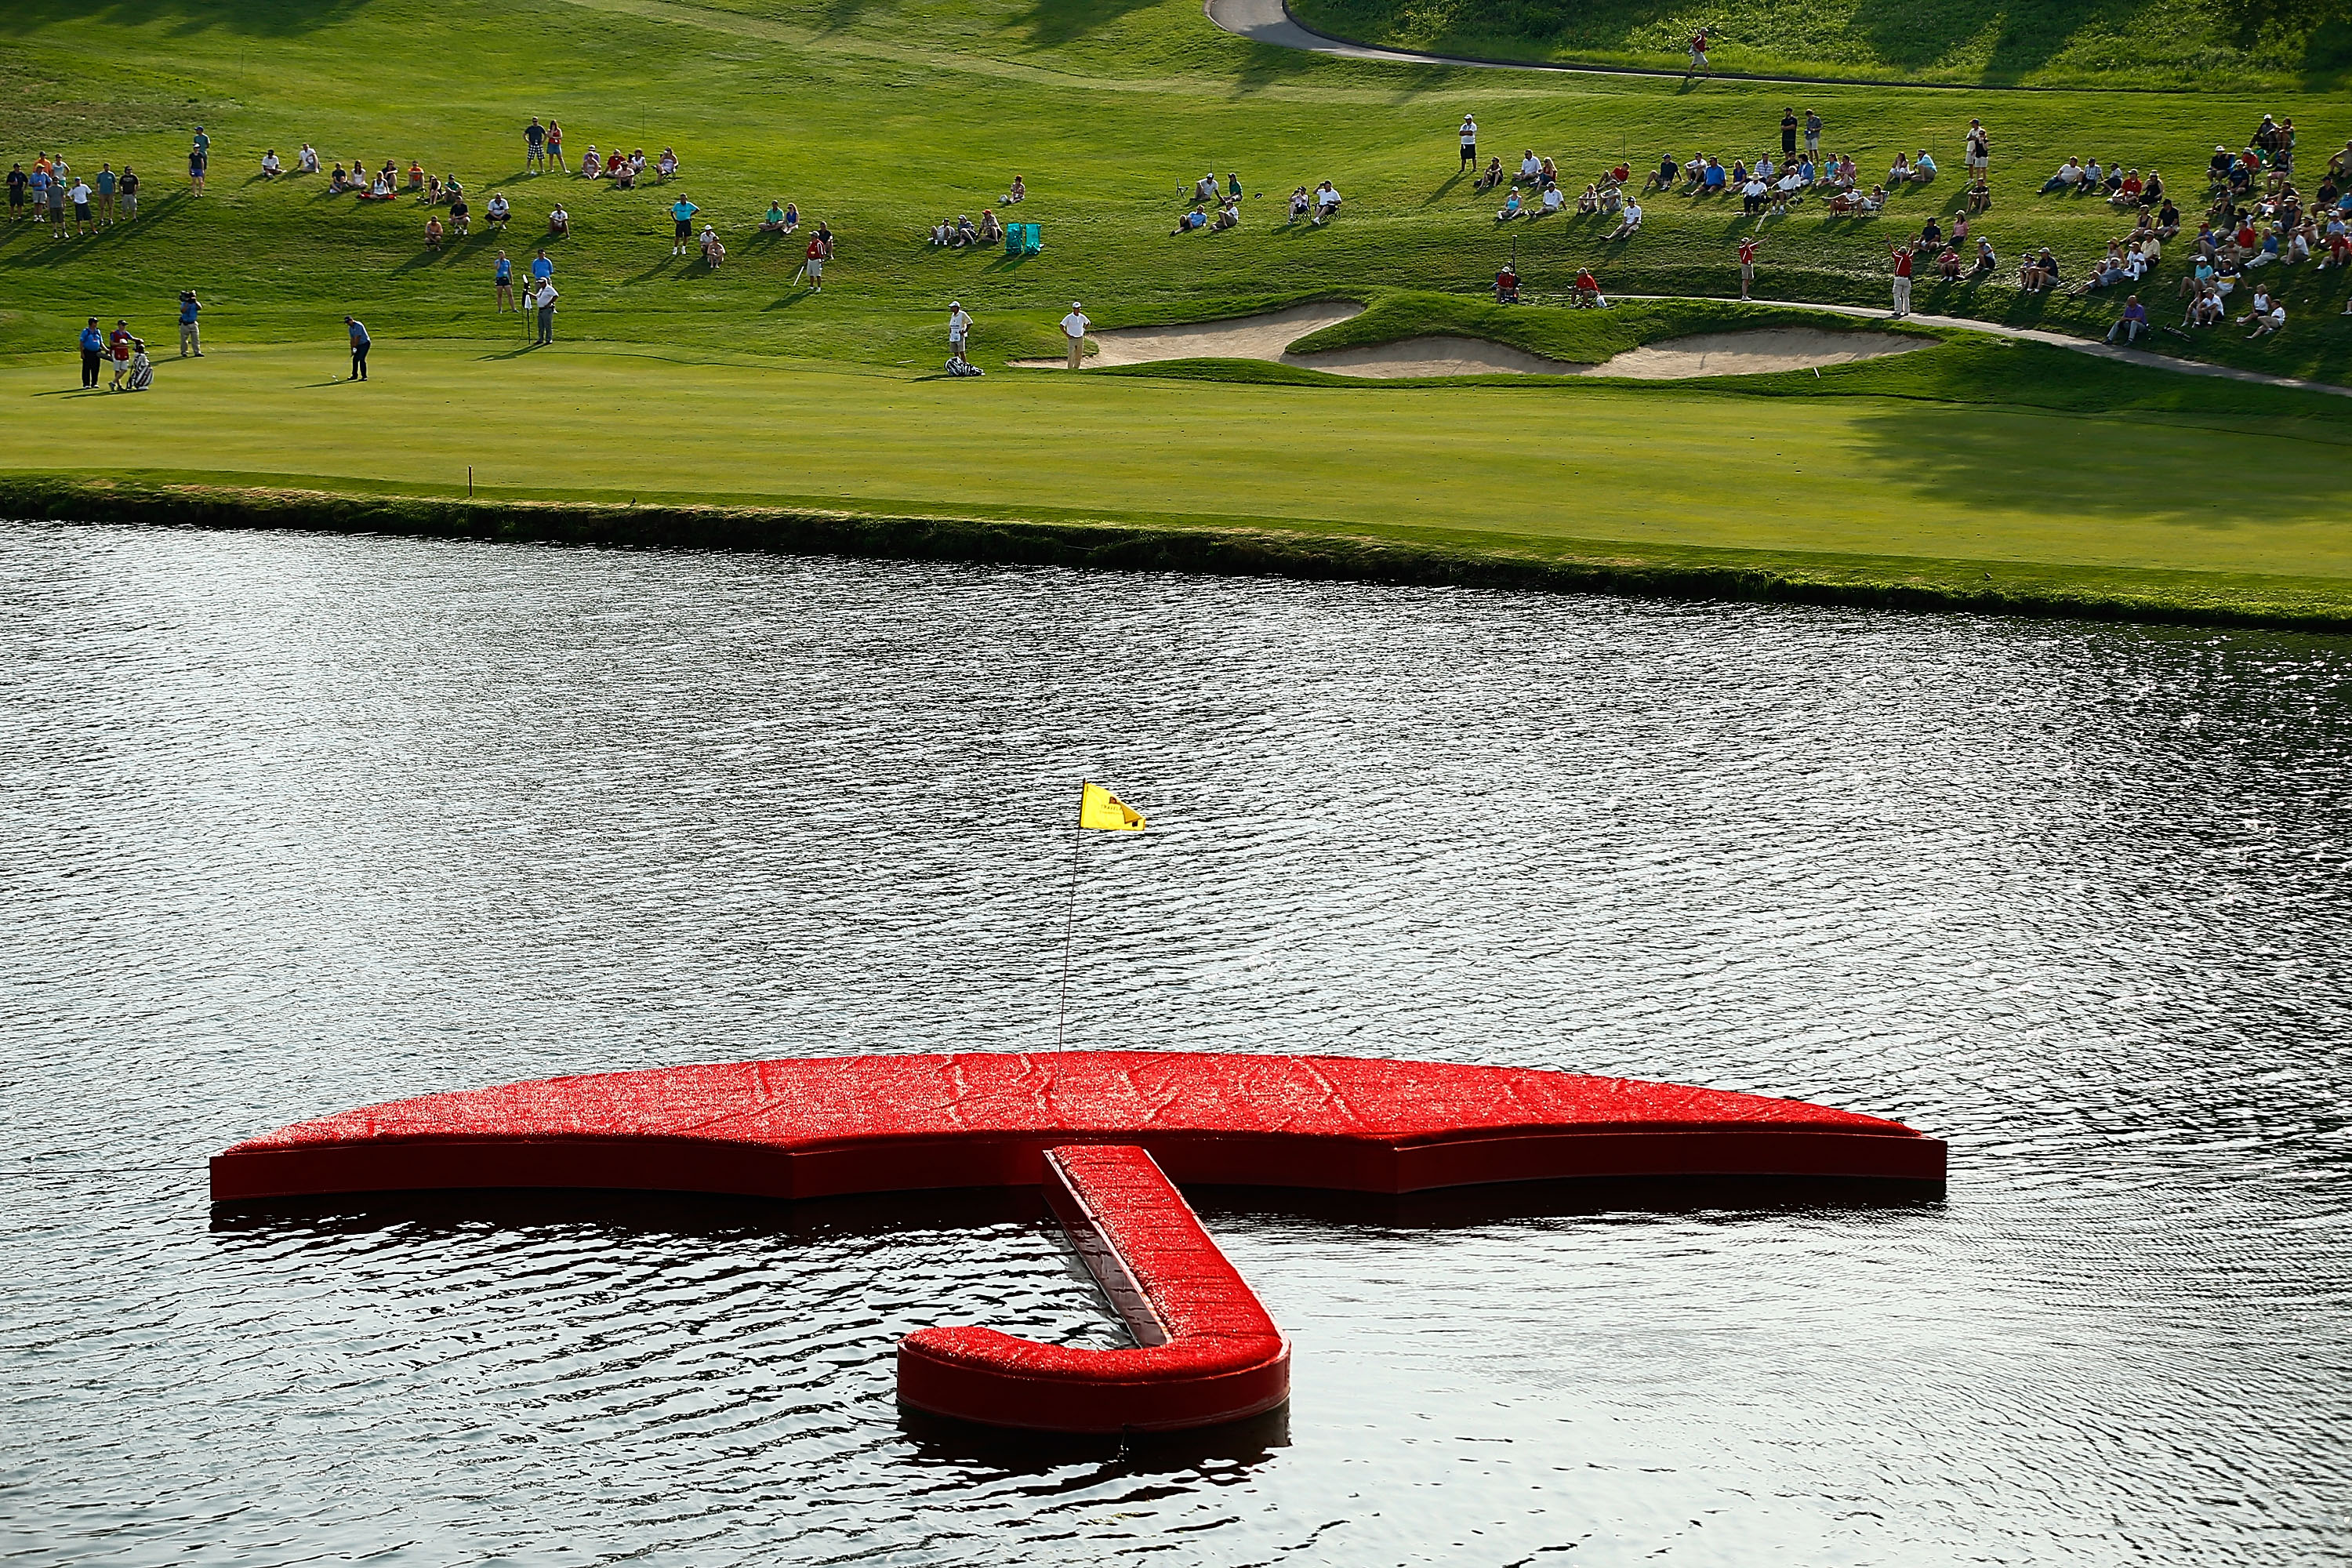 Hero attempts, fails to get Travelers Championship to make floating umbrella green a playoff hole This is the Loop GolfDigest